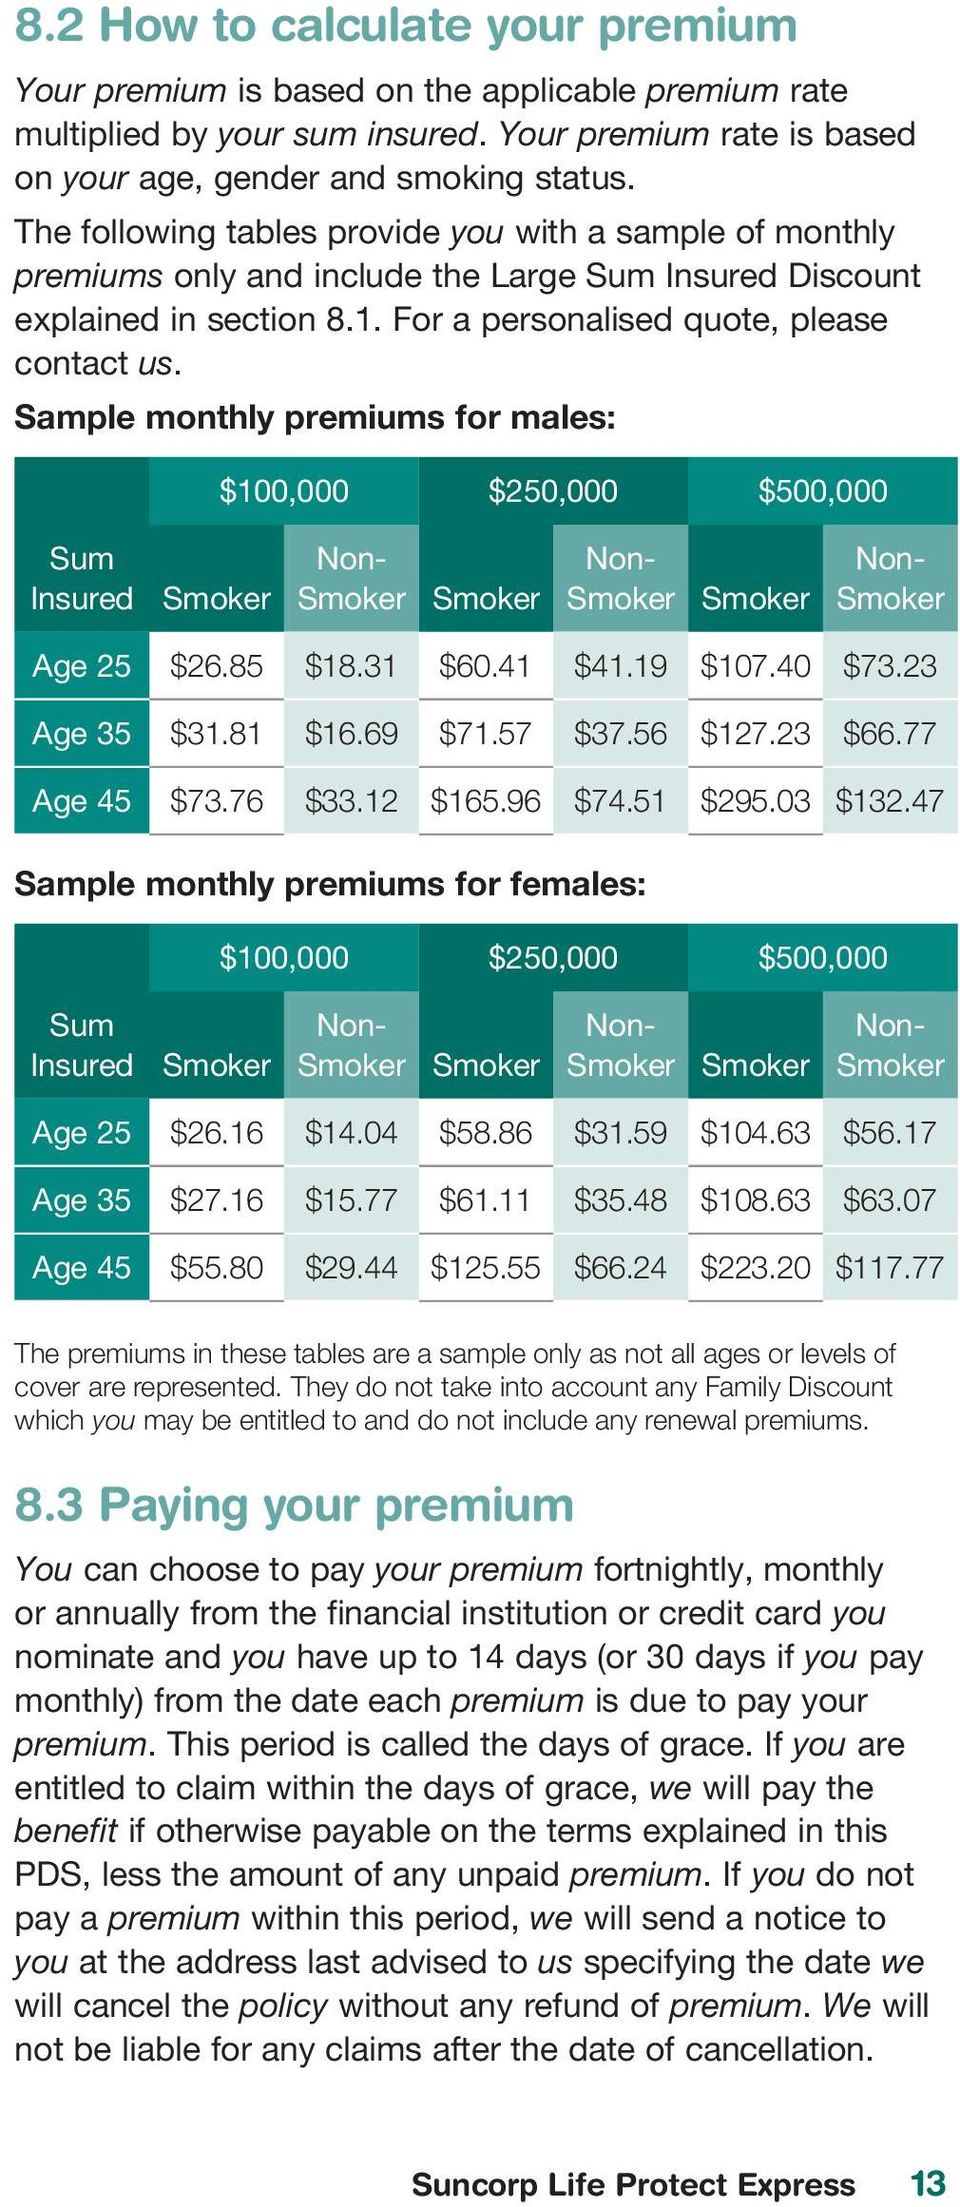 Sample monthly premiums for males: $100,000 $250,000 $500,000 Sum Insured Smoker Non- Smoker Smoker Non- Smoker Smoker Non- Smoker Age 25 $26.85 $18.31 $60.41 $41.19 $107.40 $73.23 Age 35 $31.81 $16.